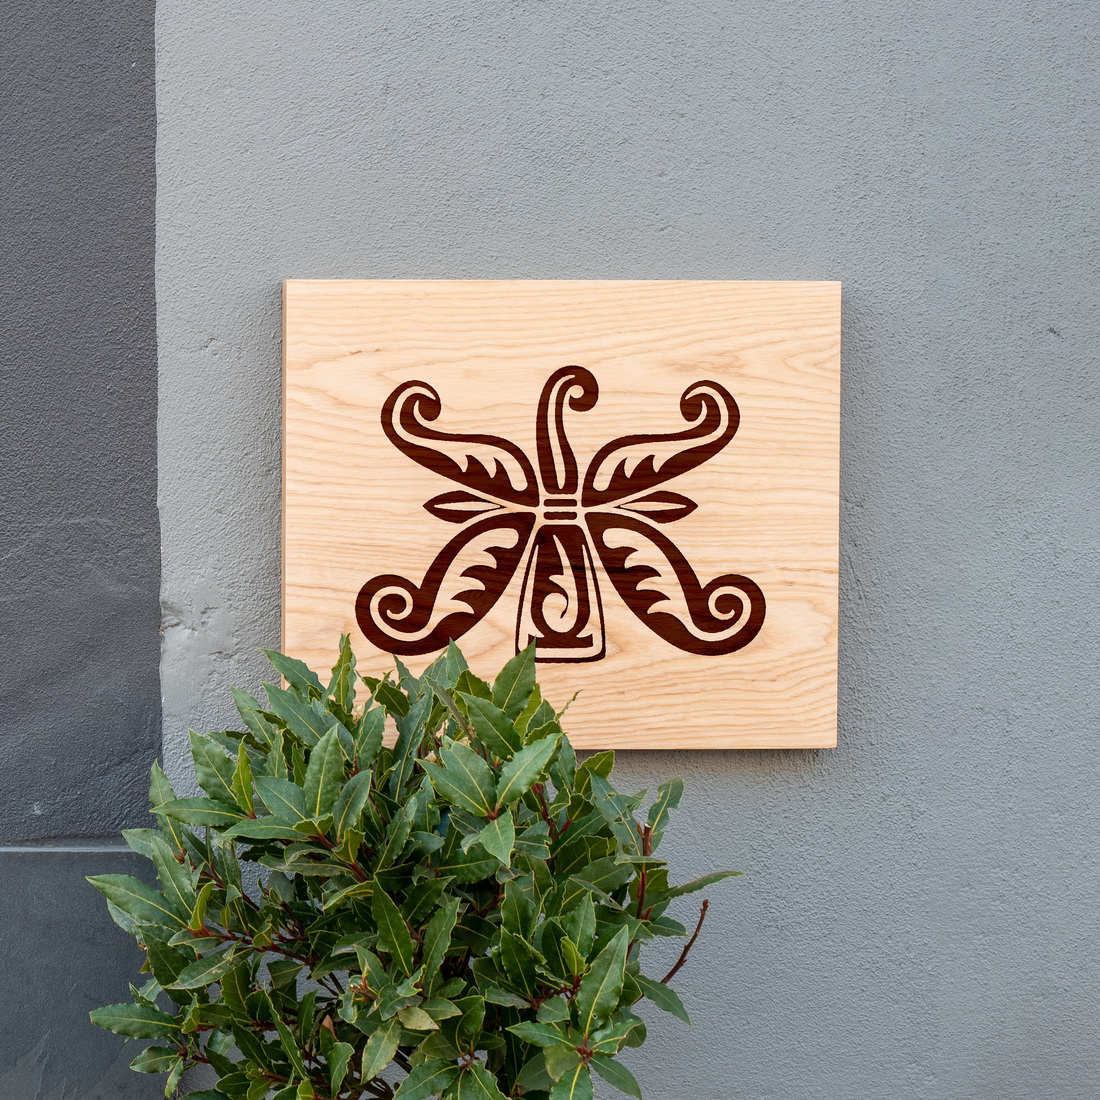 Wooden plaque with a decorative design on it.